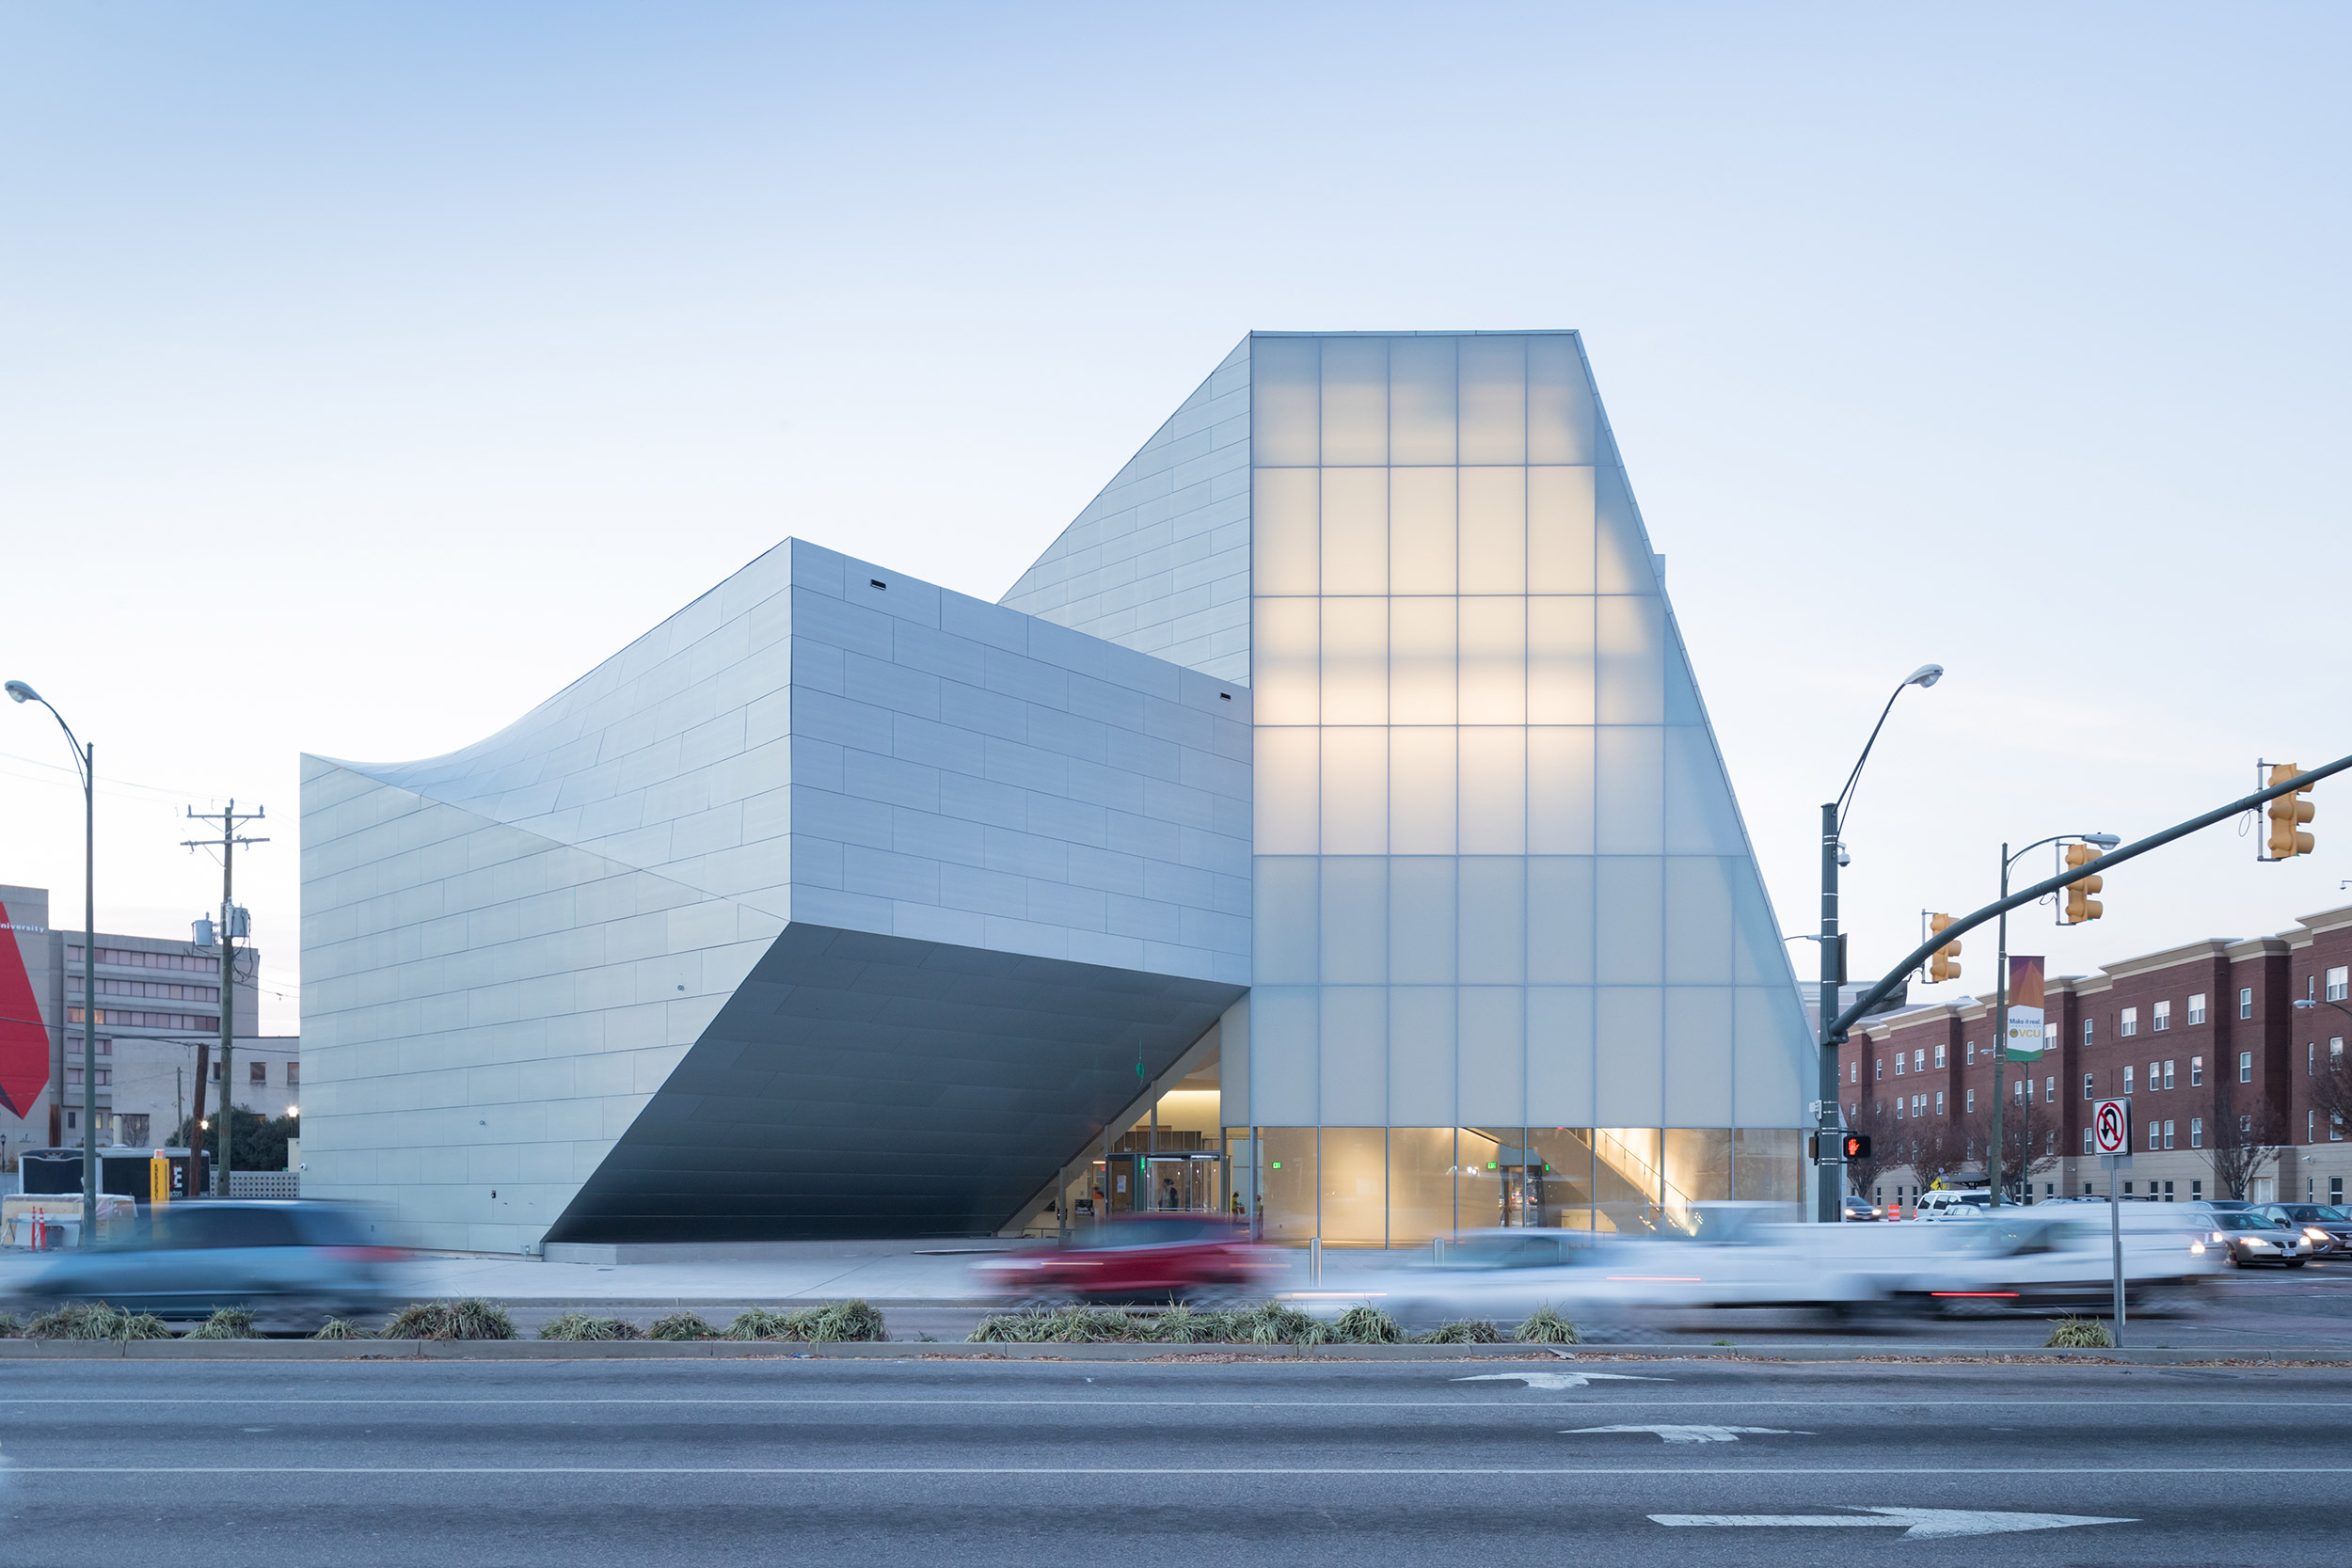 Virginia Commonwealth University Institute for Contemporary Art by Steven Holl Architects; BCWH; and Michael Boucher Landscape Architecture. Photo: Iwan Baan.